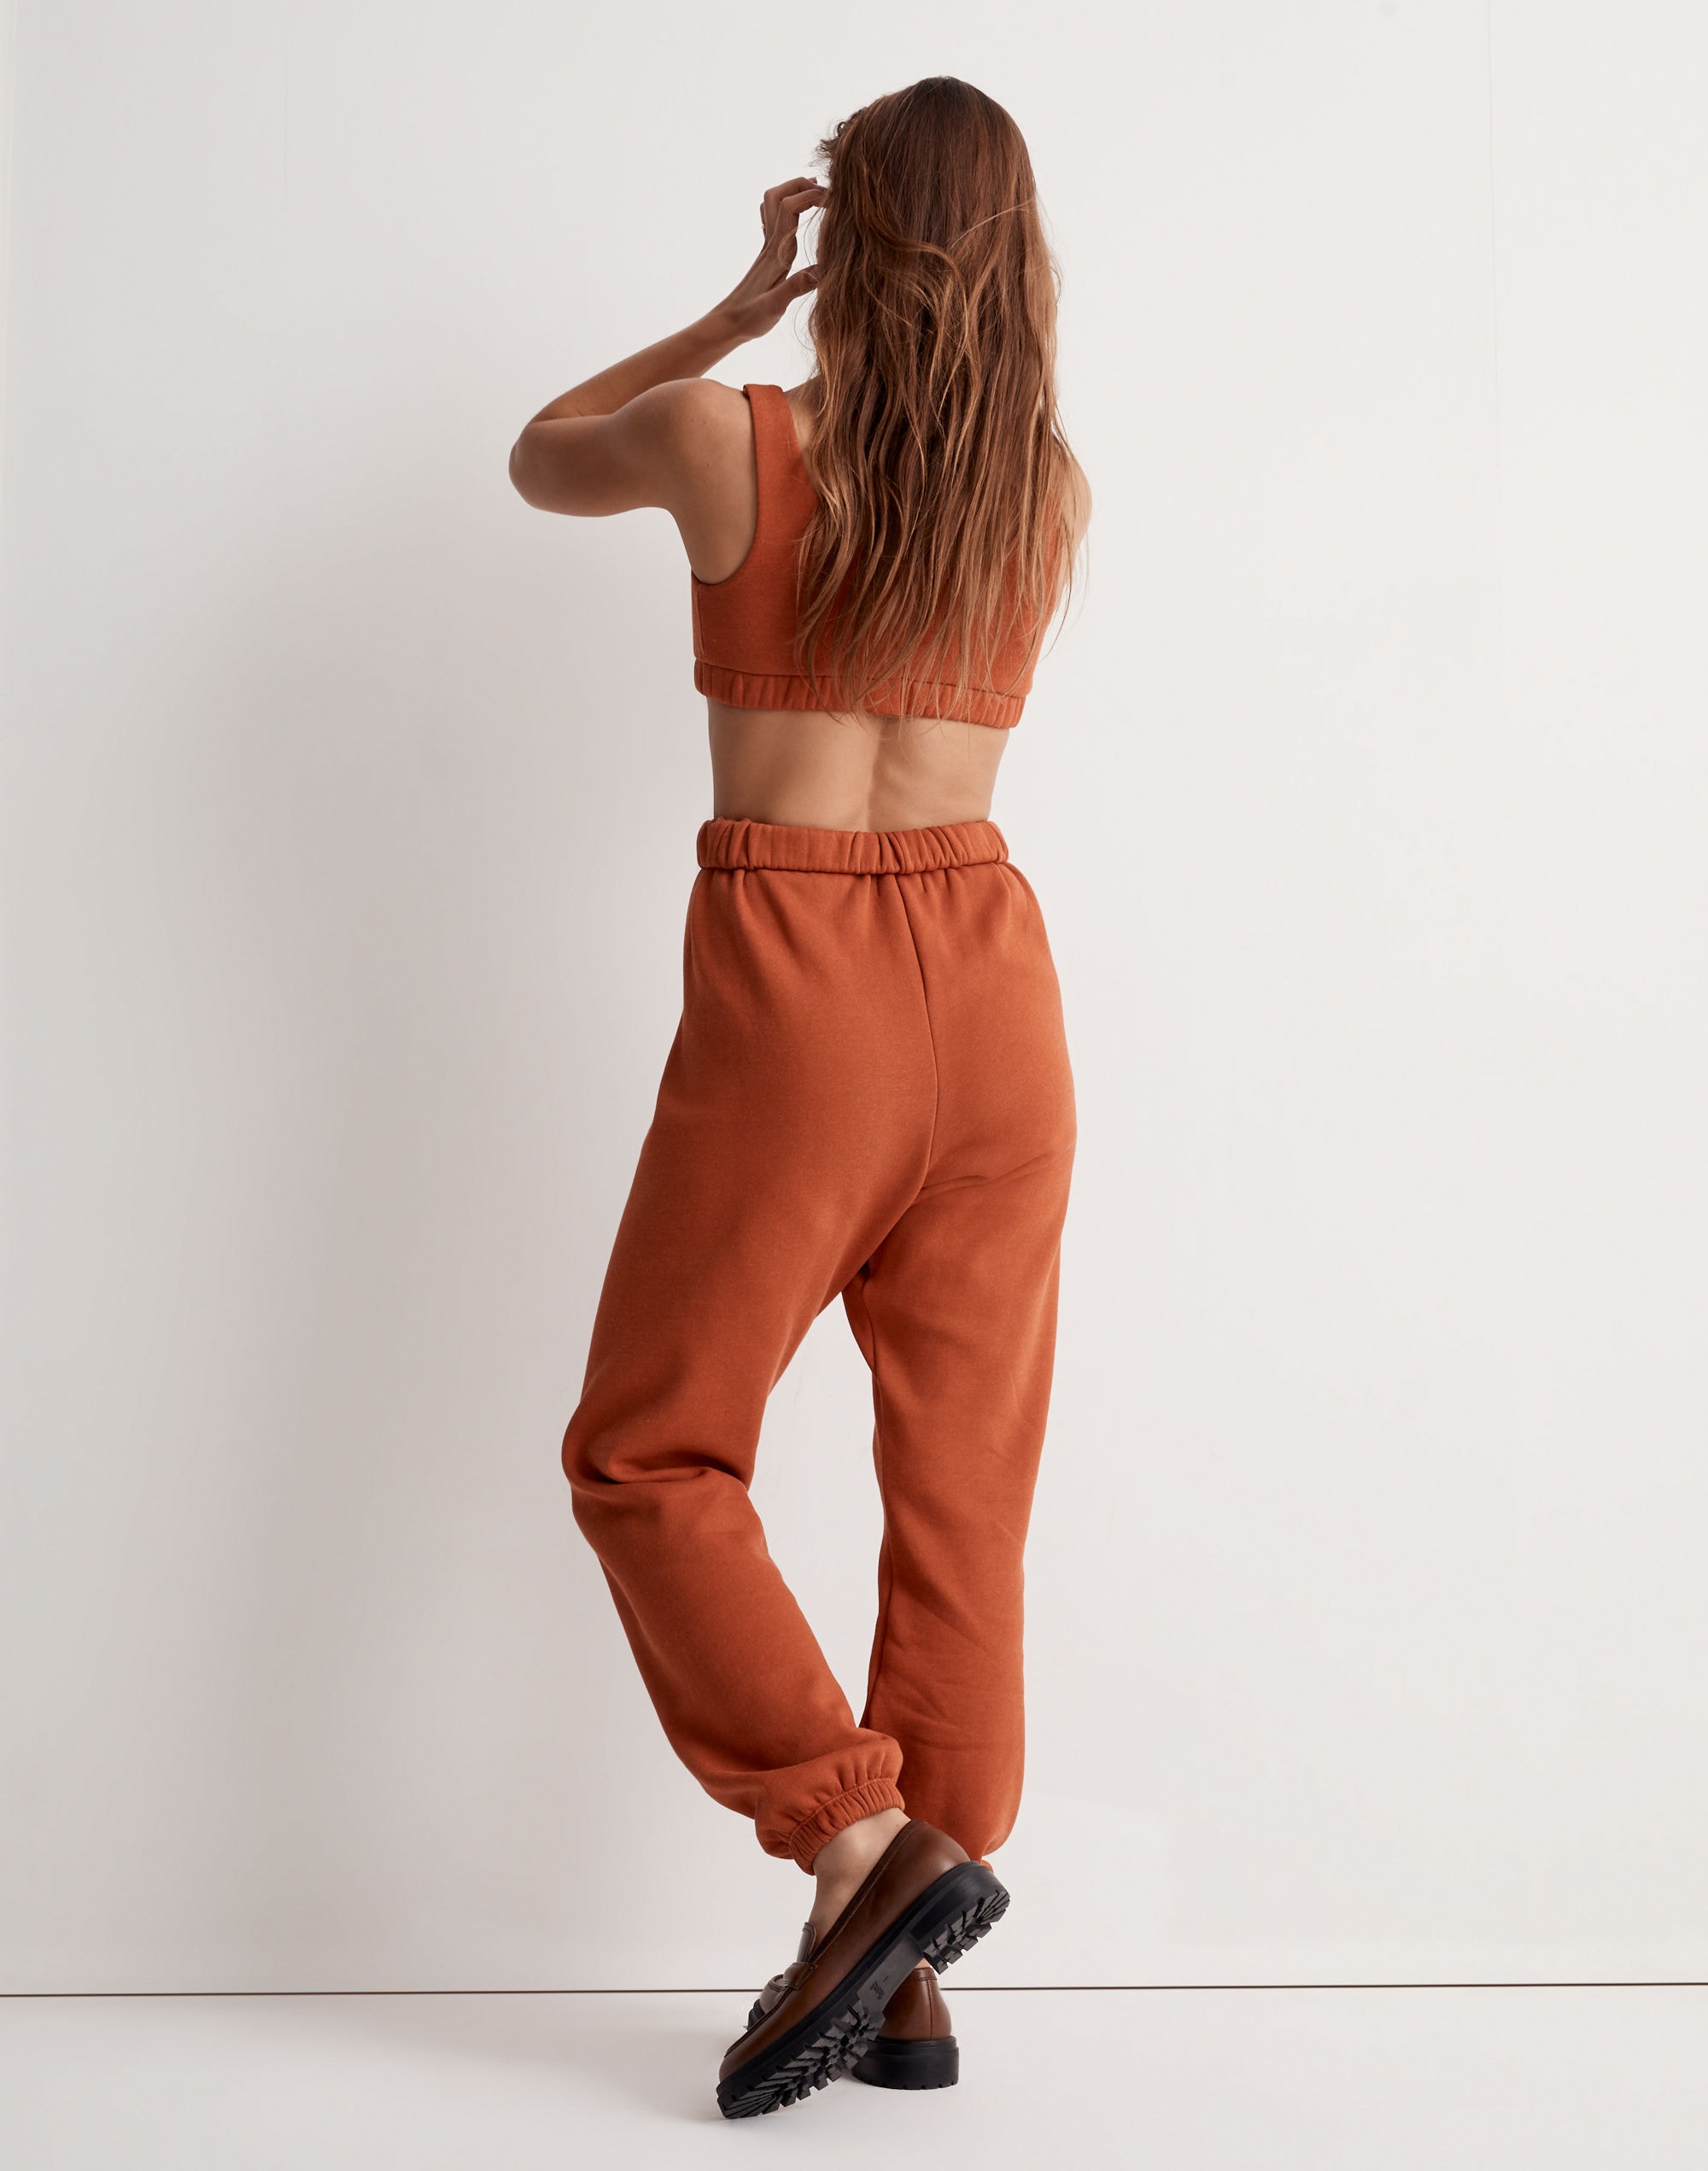 Madewell x Donni Pearl (Re)sourced Fleece Roll Sweatpants